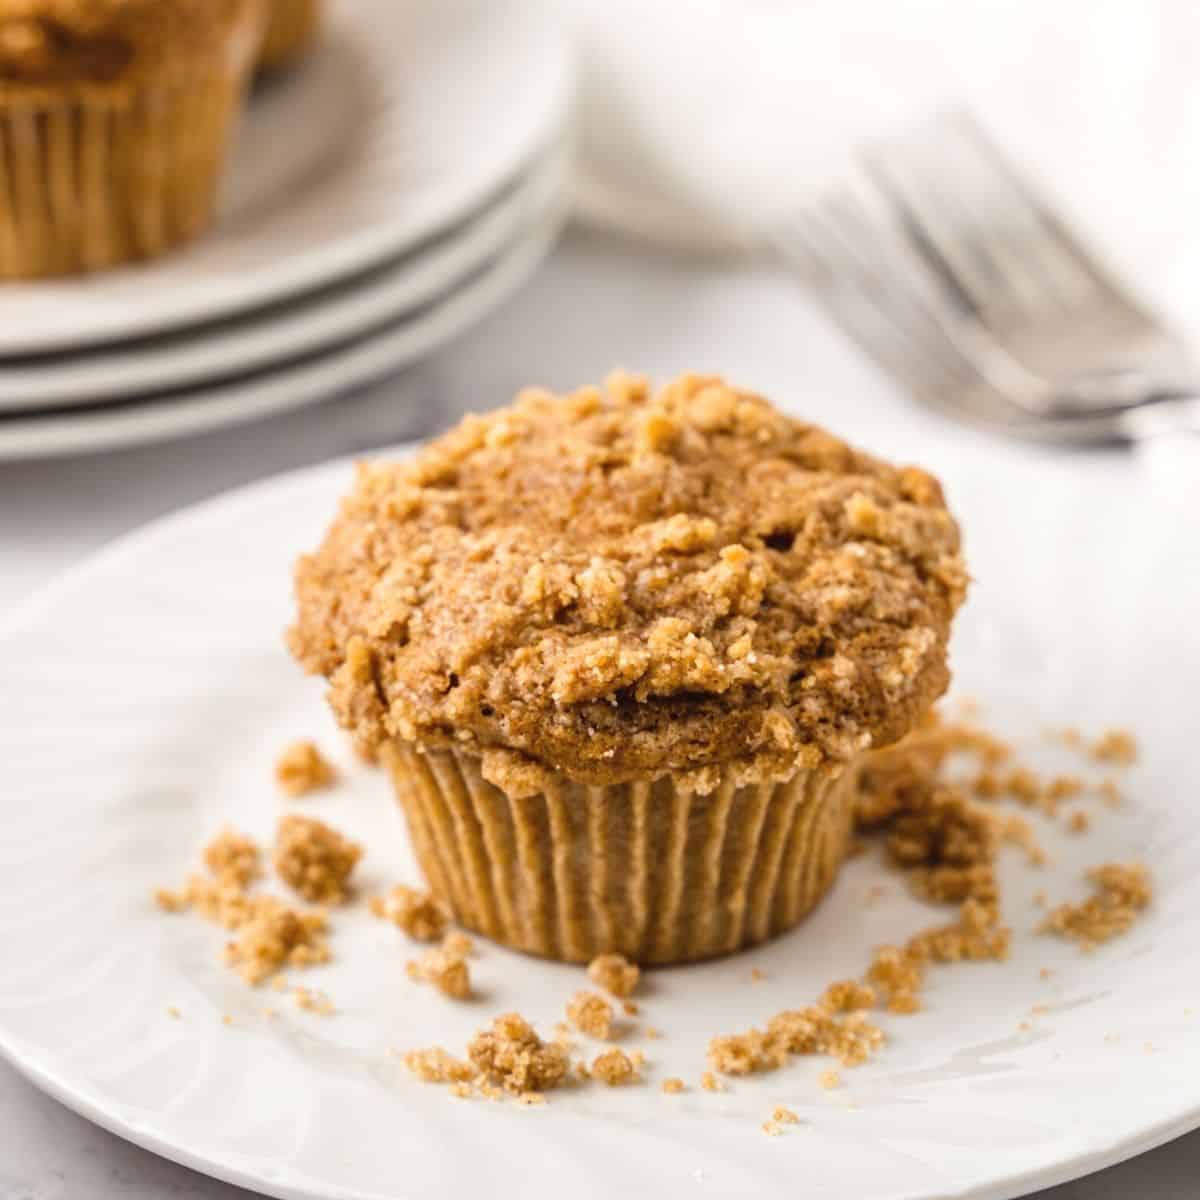 Sugar Free Cinnamon Apple Streusel Muffins, a delicious recipe for apple cinnamon muffins with streusel topping made with no added sugar.